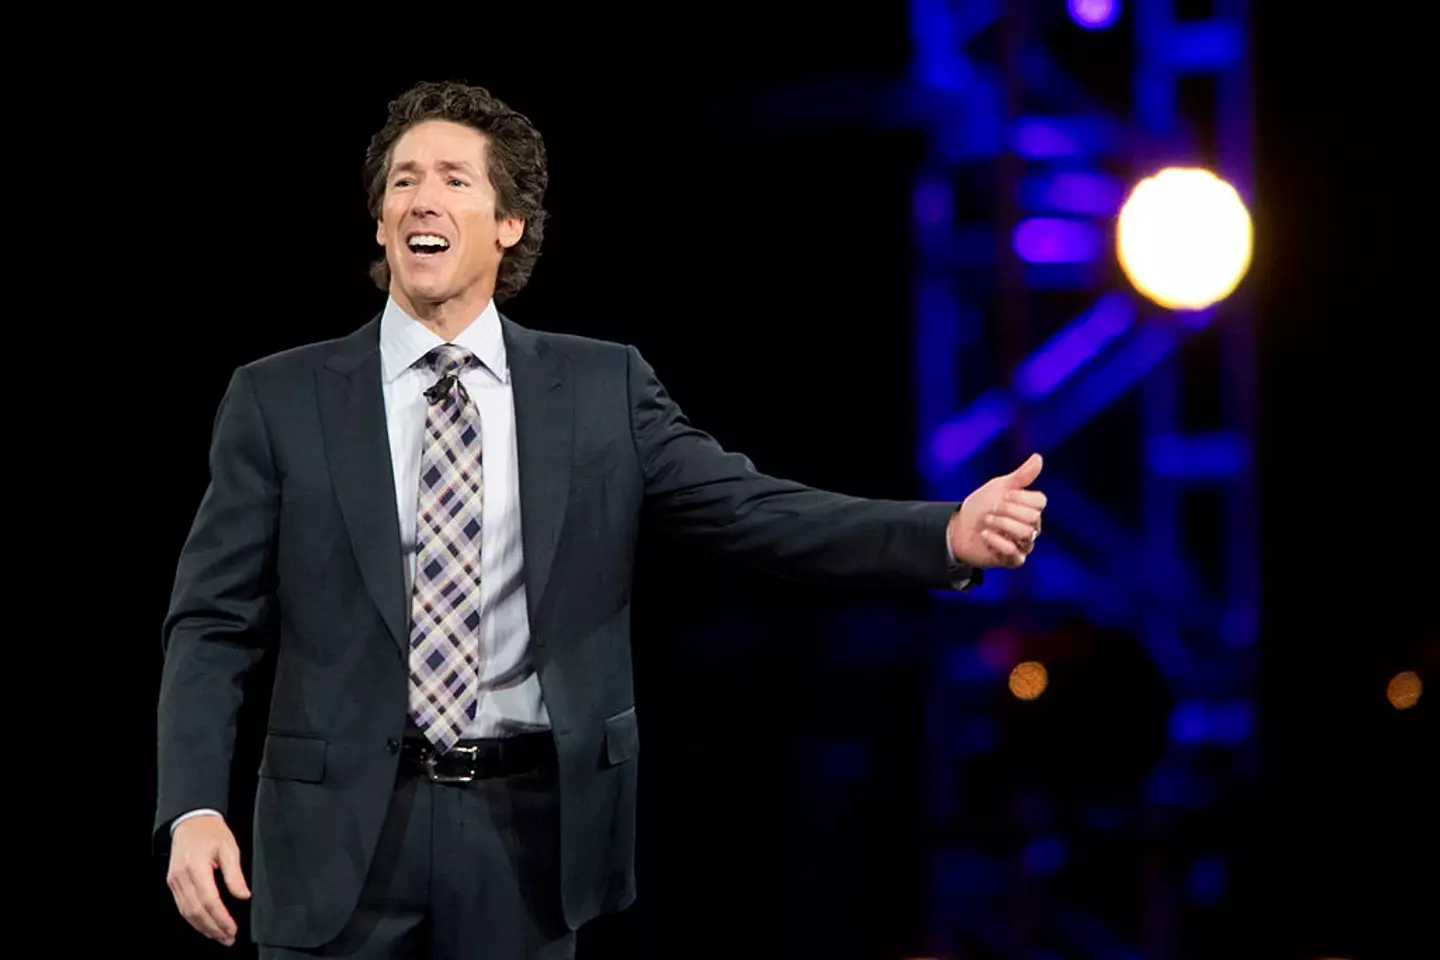 US pastor Joel Osteen has been name-dropped in the lyrics. (Cooper Neill/Getty Images)